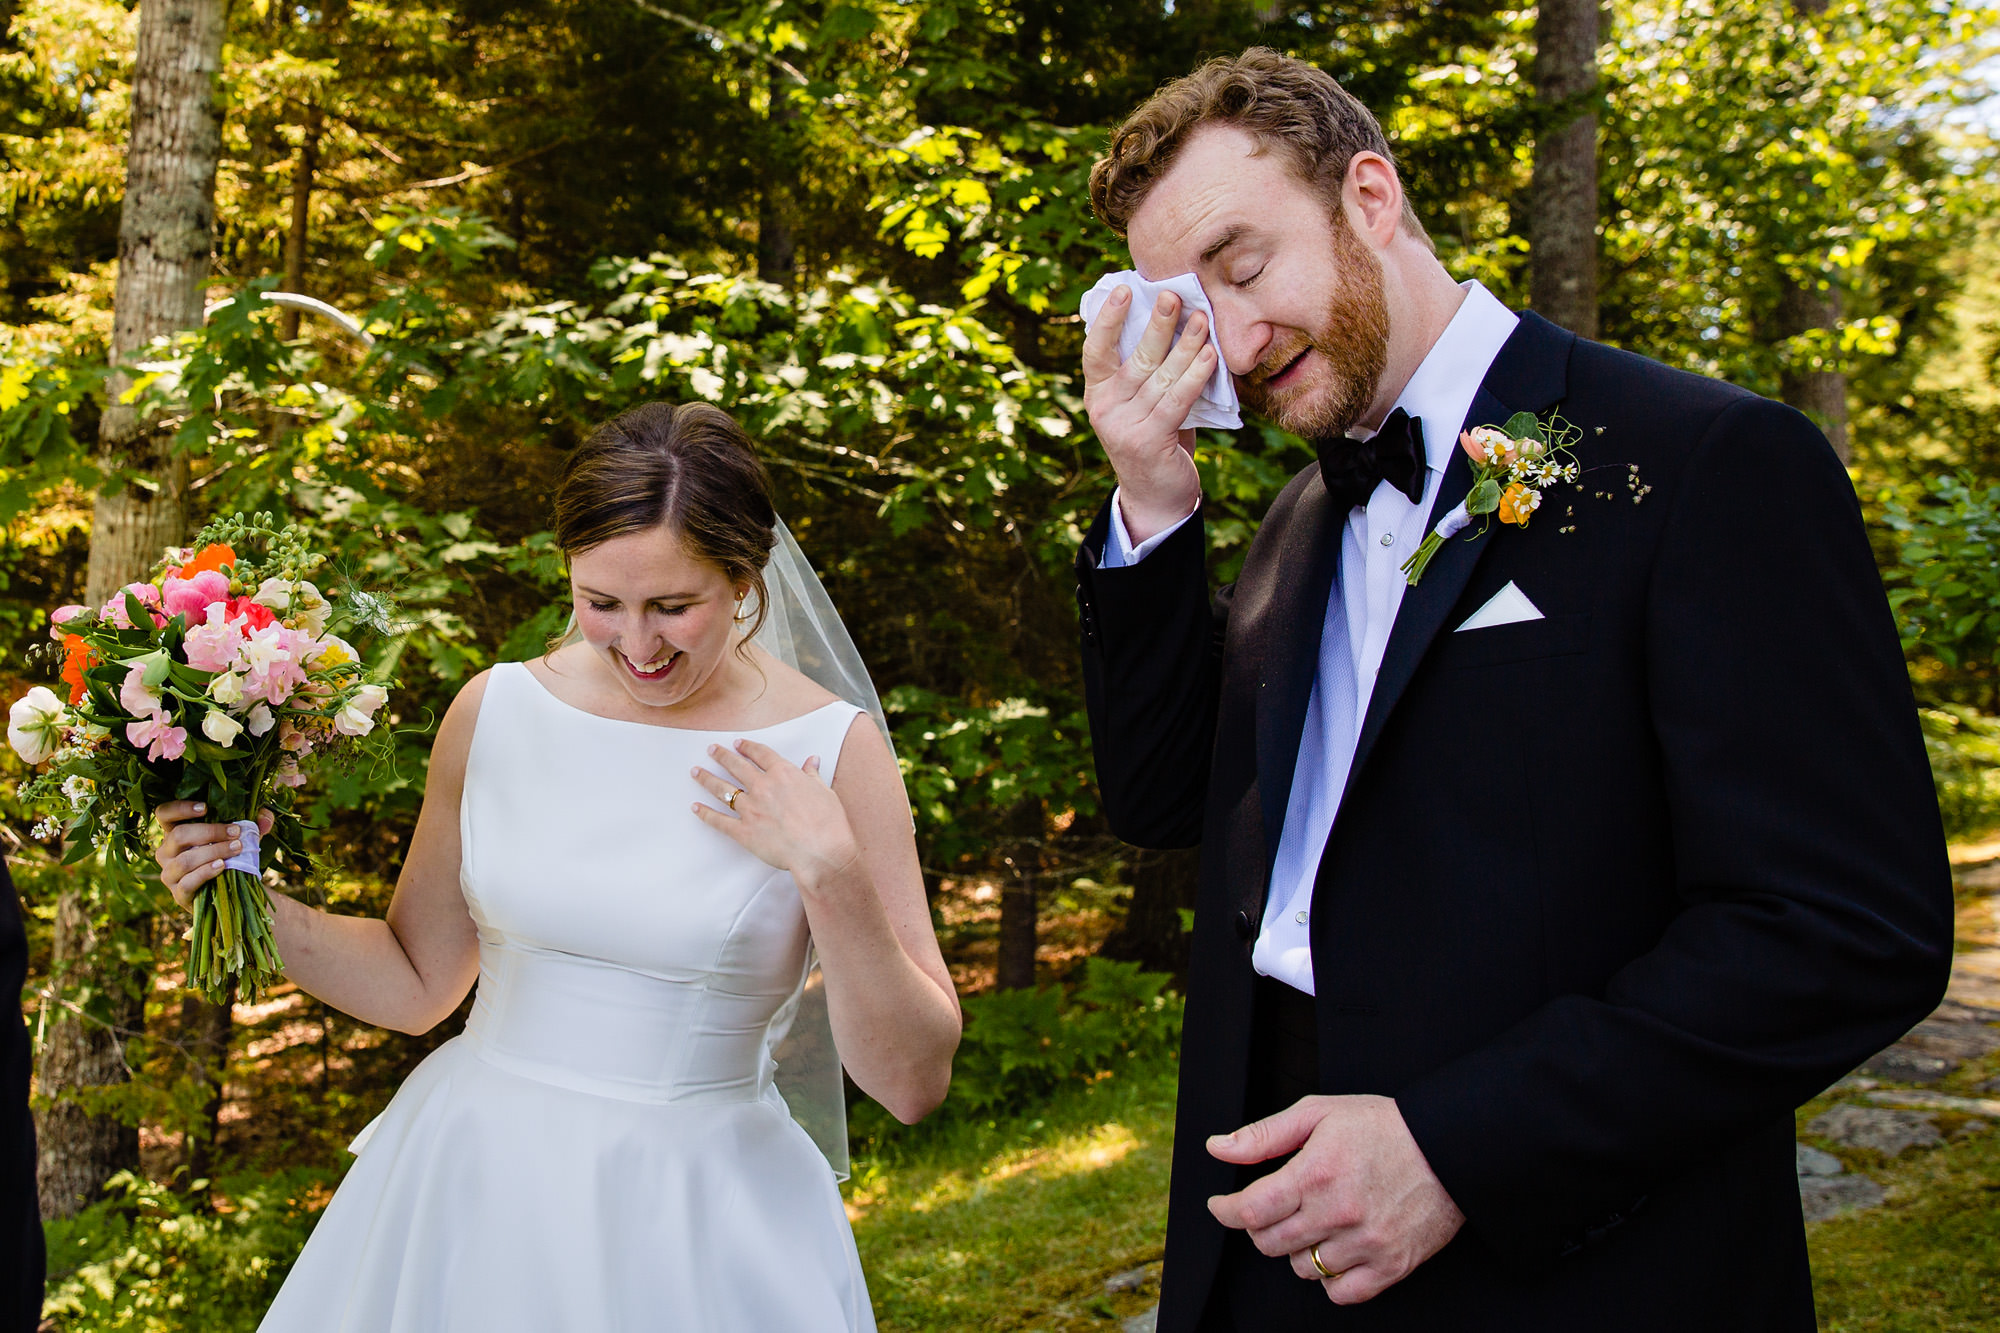 The bride and groom immediately after their wedding ceremony in Maine